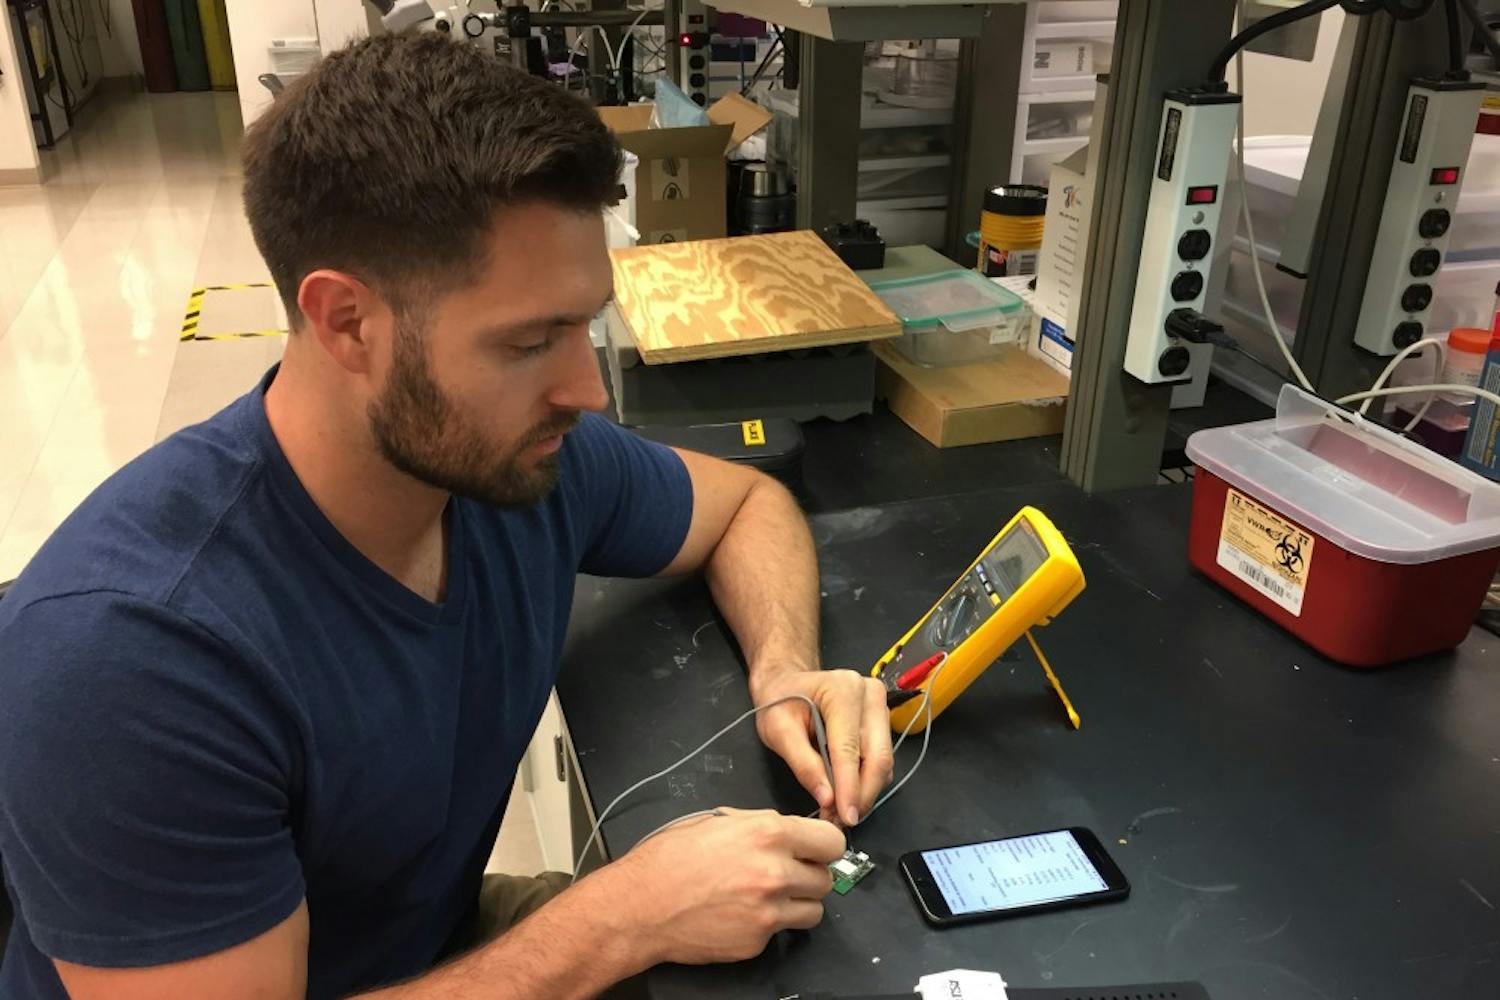 Kyle Mallires working on a PRISMS watch in Tempe, Arizona on April 17, 2017.